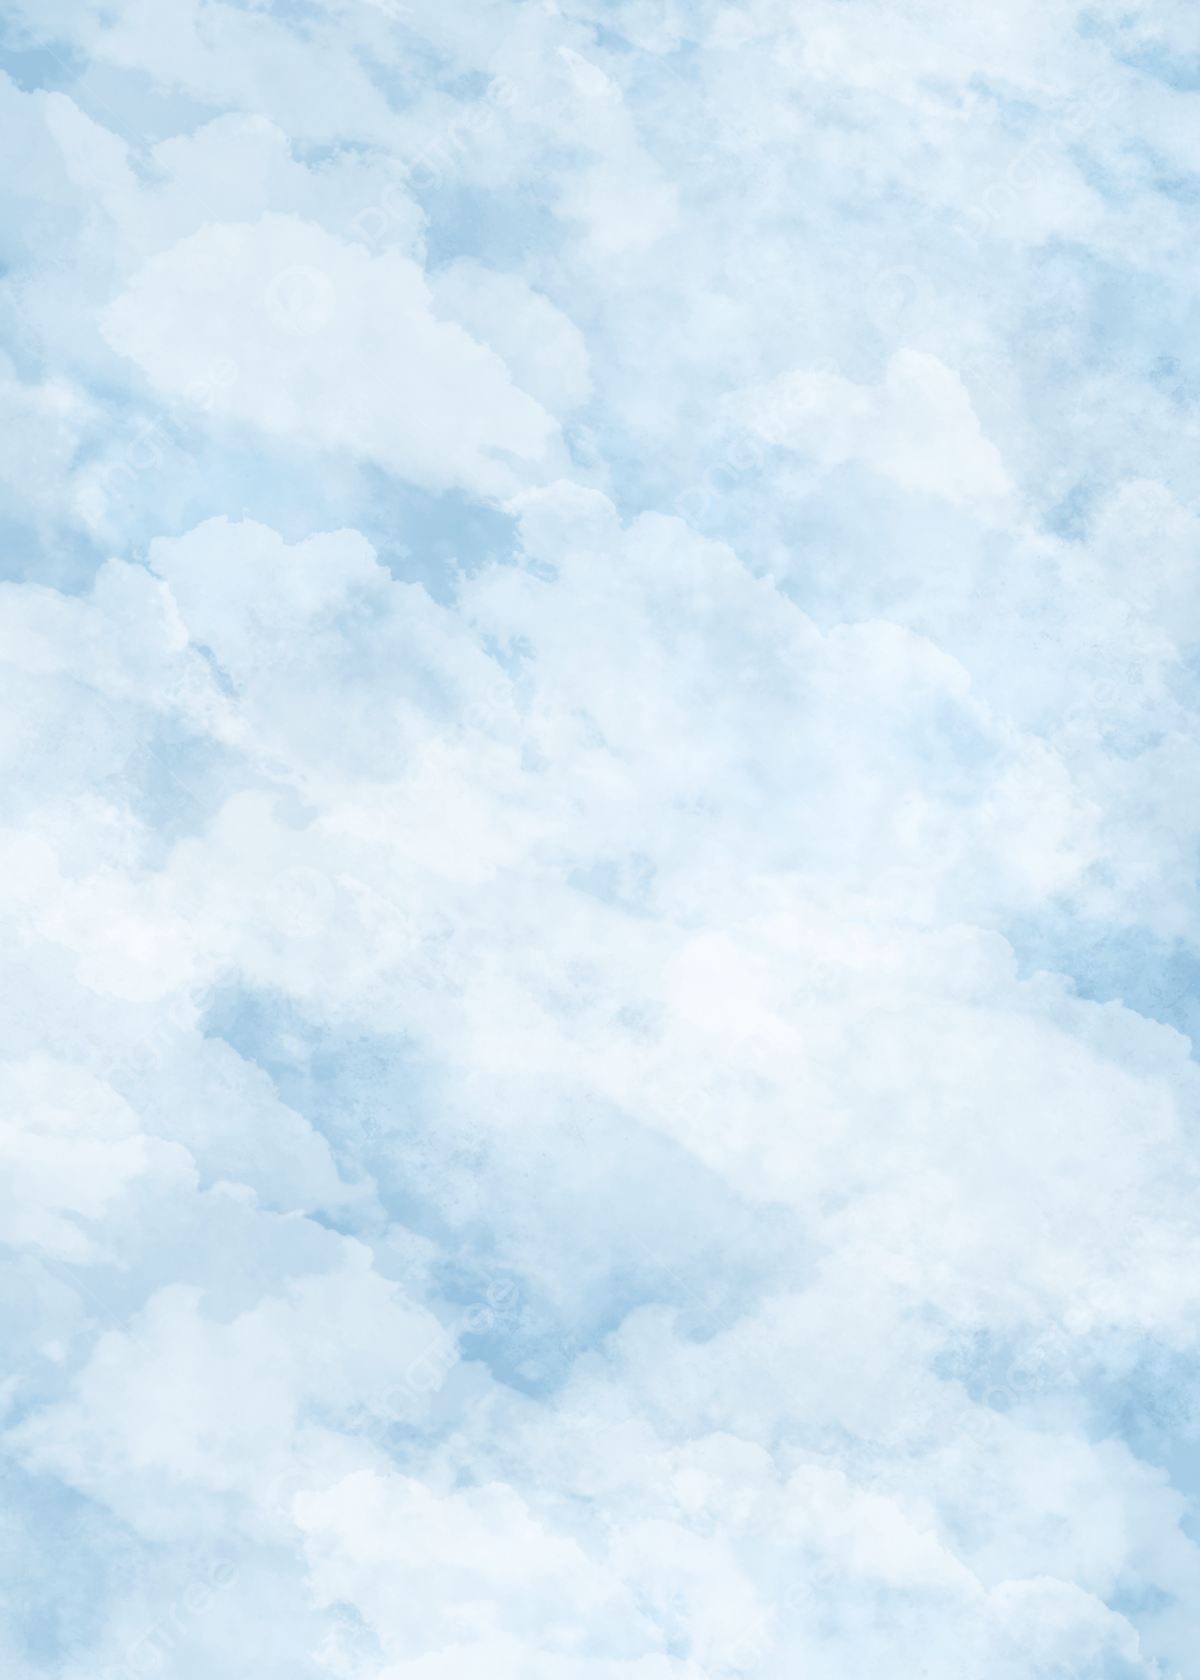 Pastel Blue Aesthetic Background Image, HD Picture and Wallpaper For Free Download